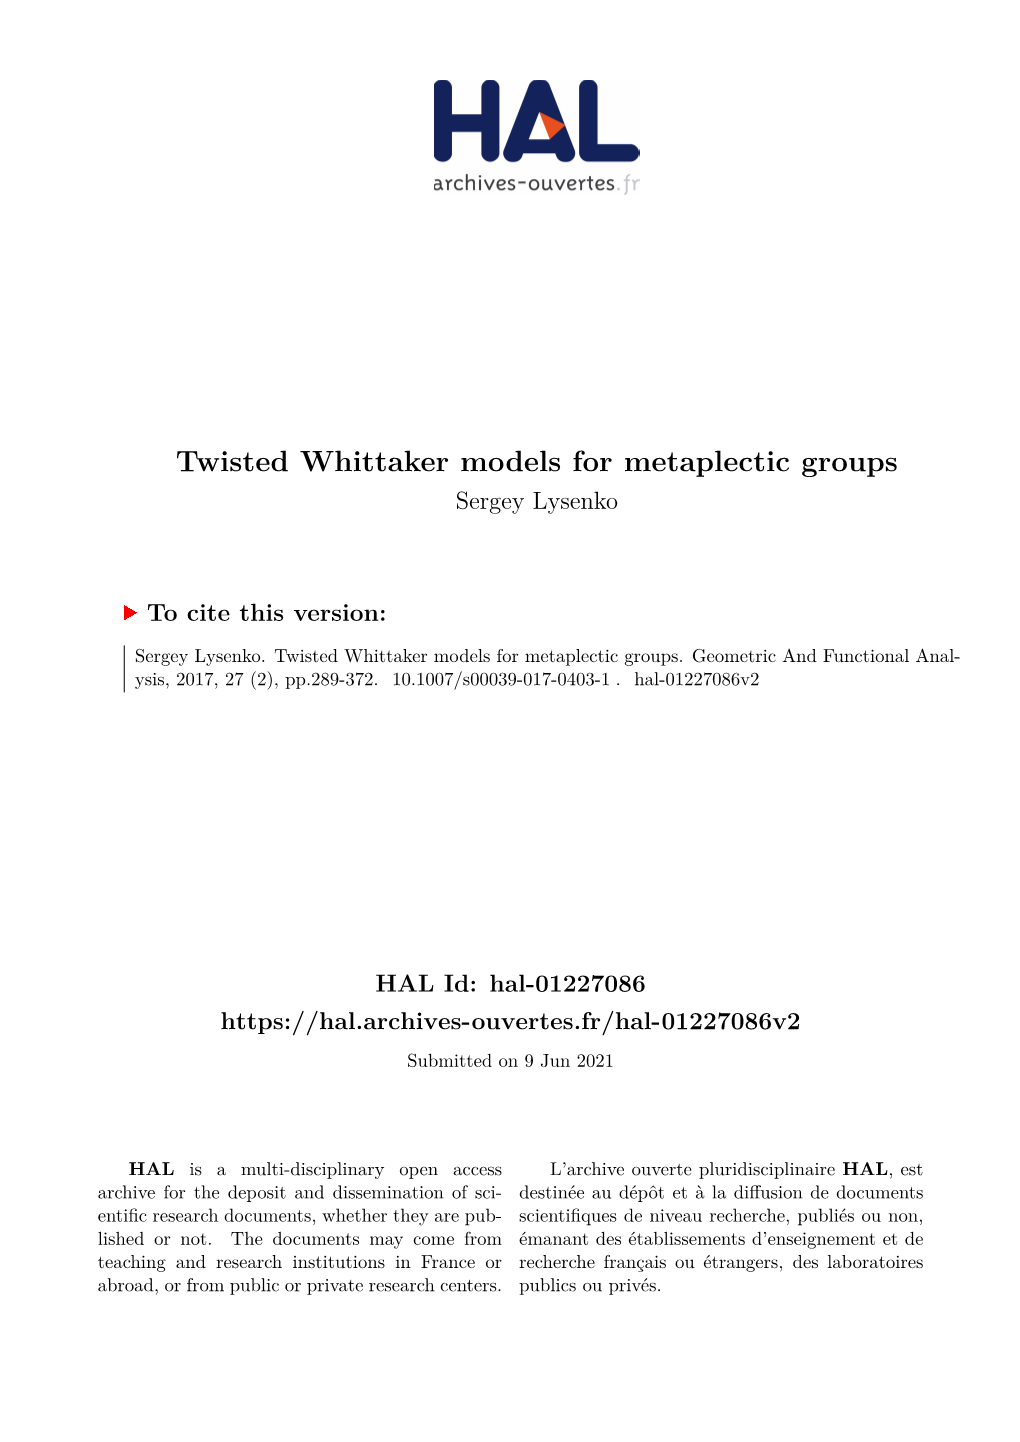 Twisted Whittaker Models for Metaplectic Groups Sergey Lysenko